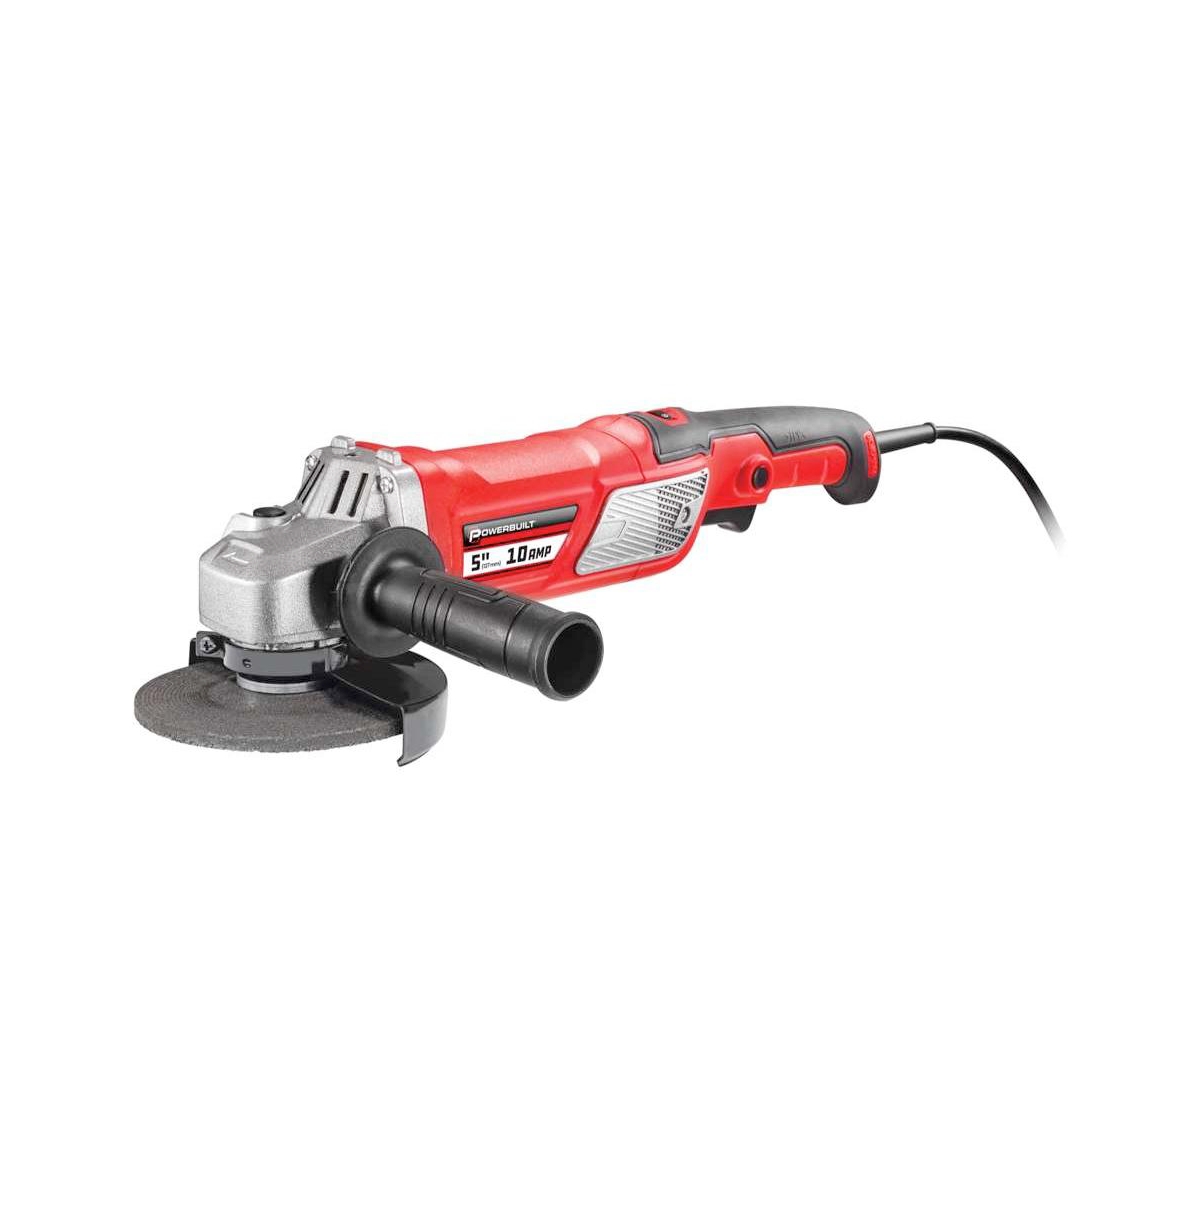 5 Inch 10 Amp Variable Speed Angle Grinder with Electronic Speed Control - Red